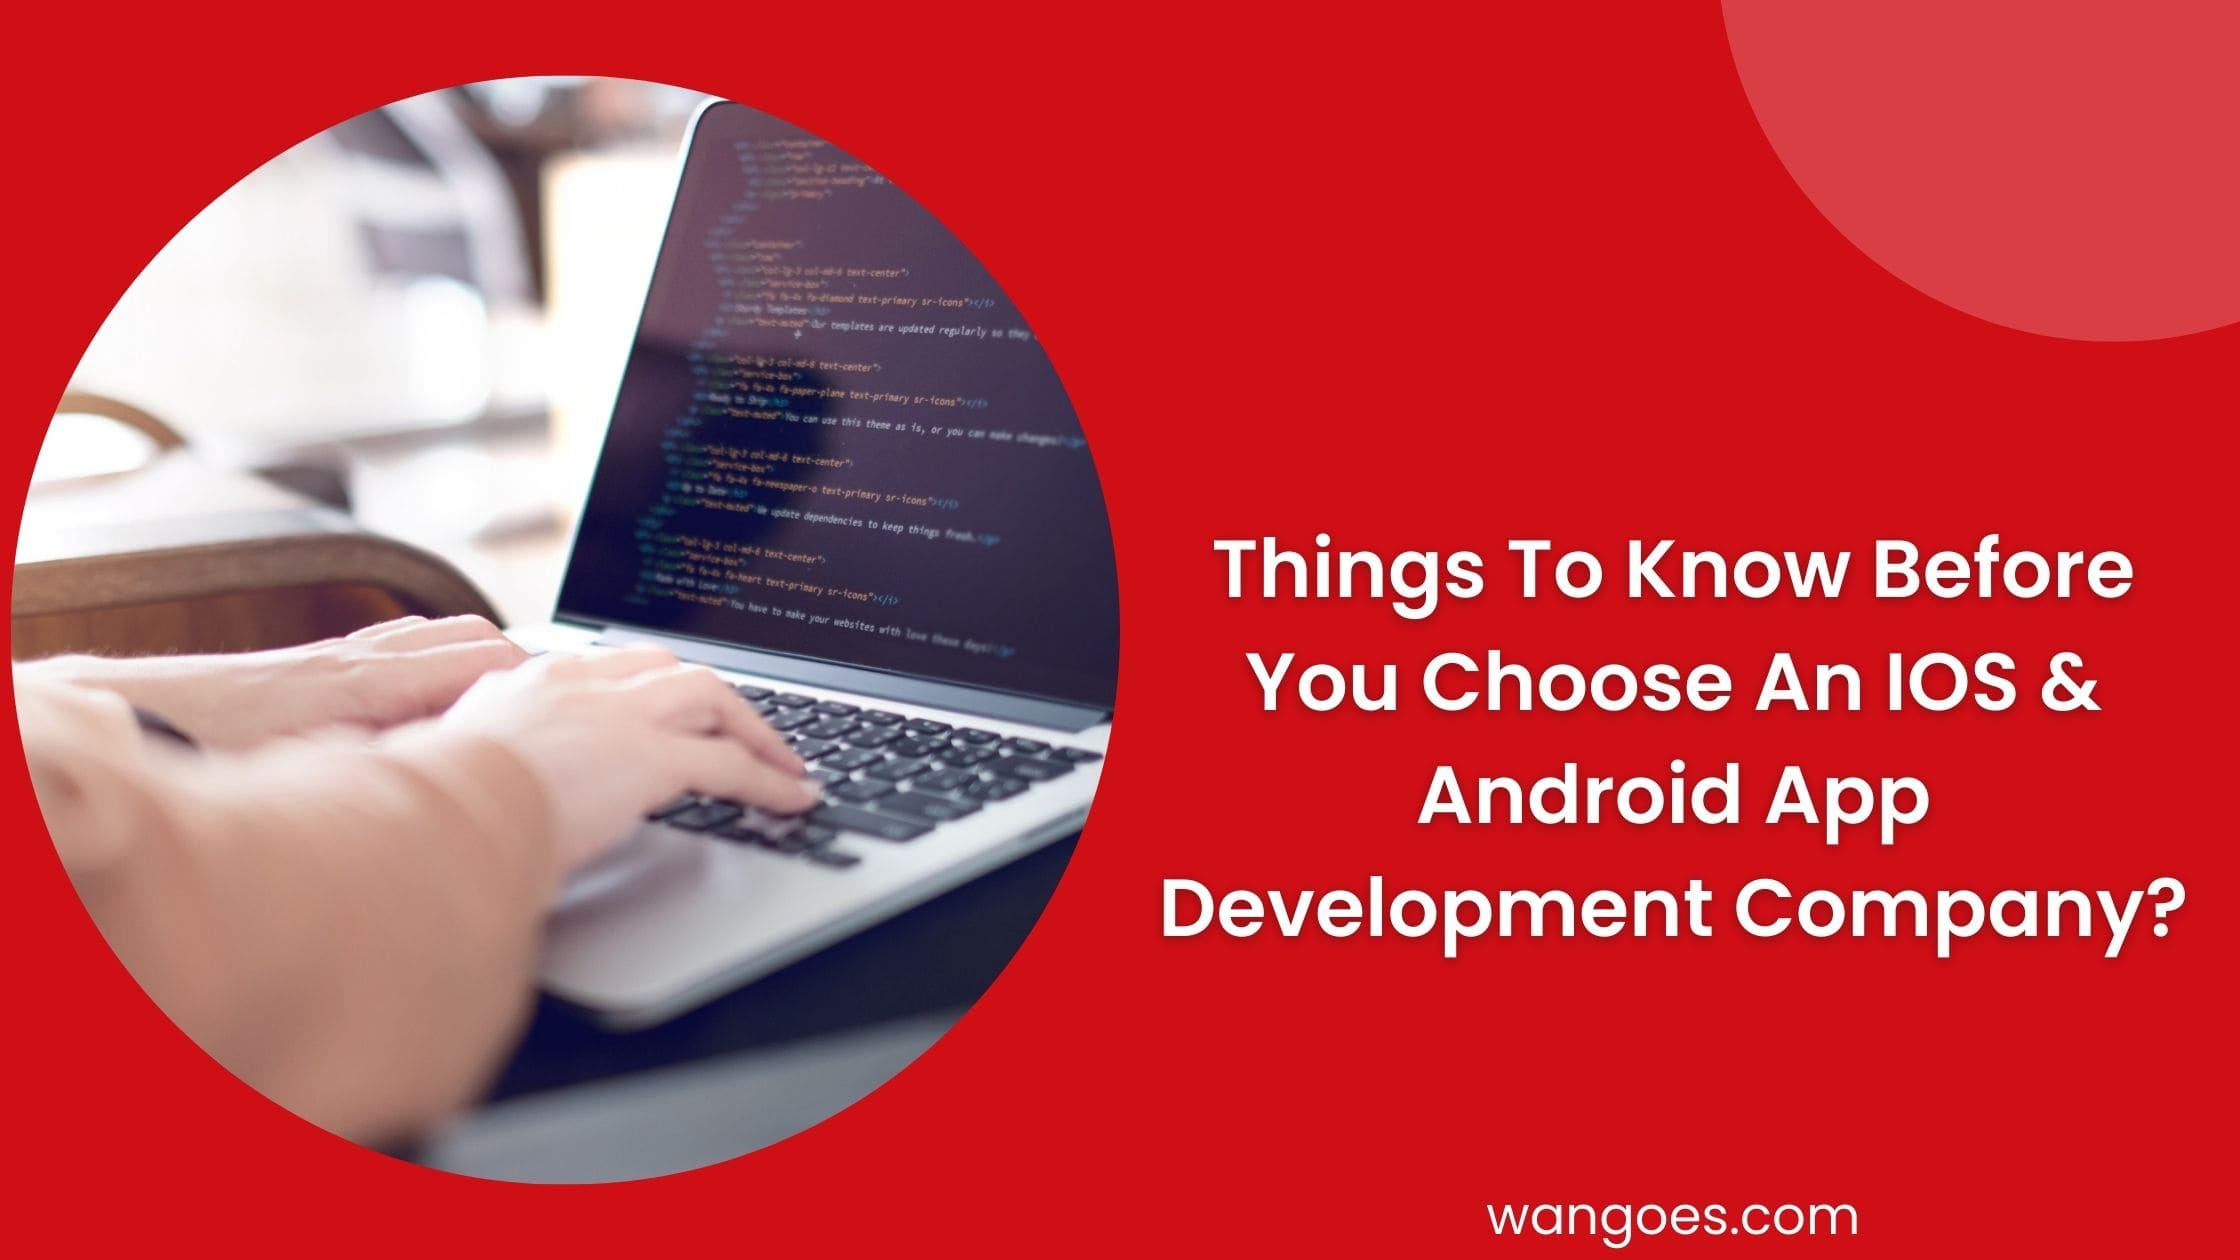 Things To Know Before You Choose An IOS & Android App Development Company?